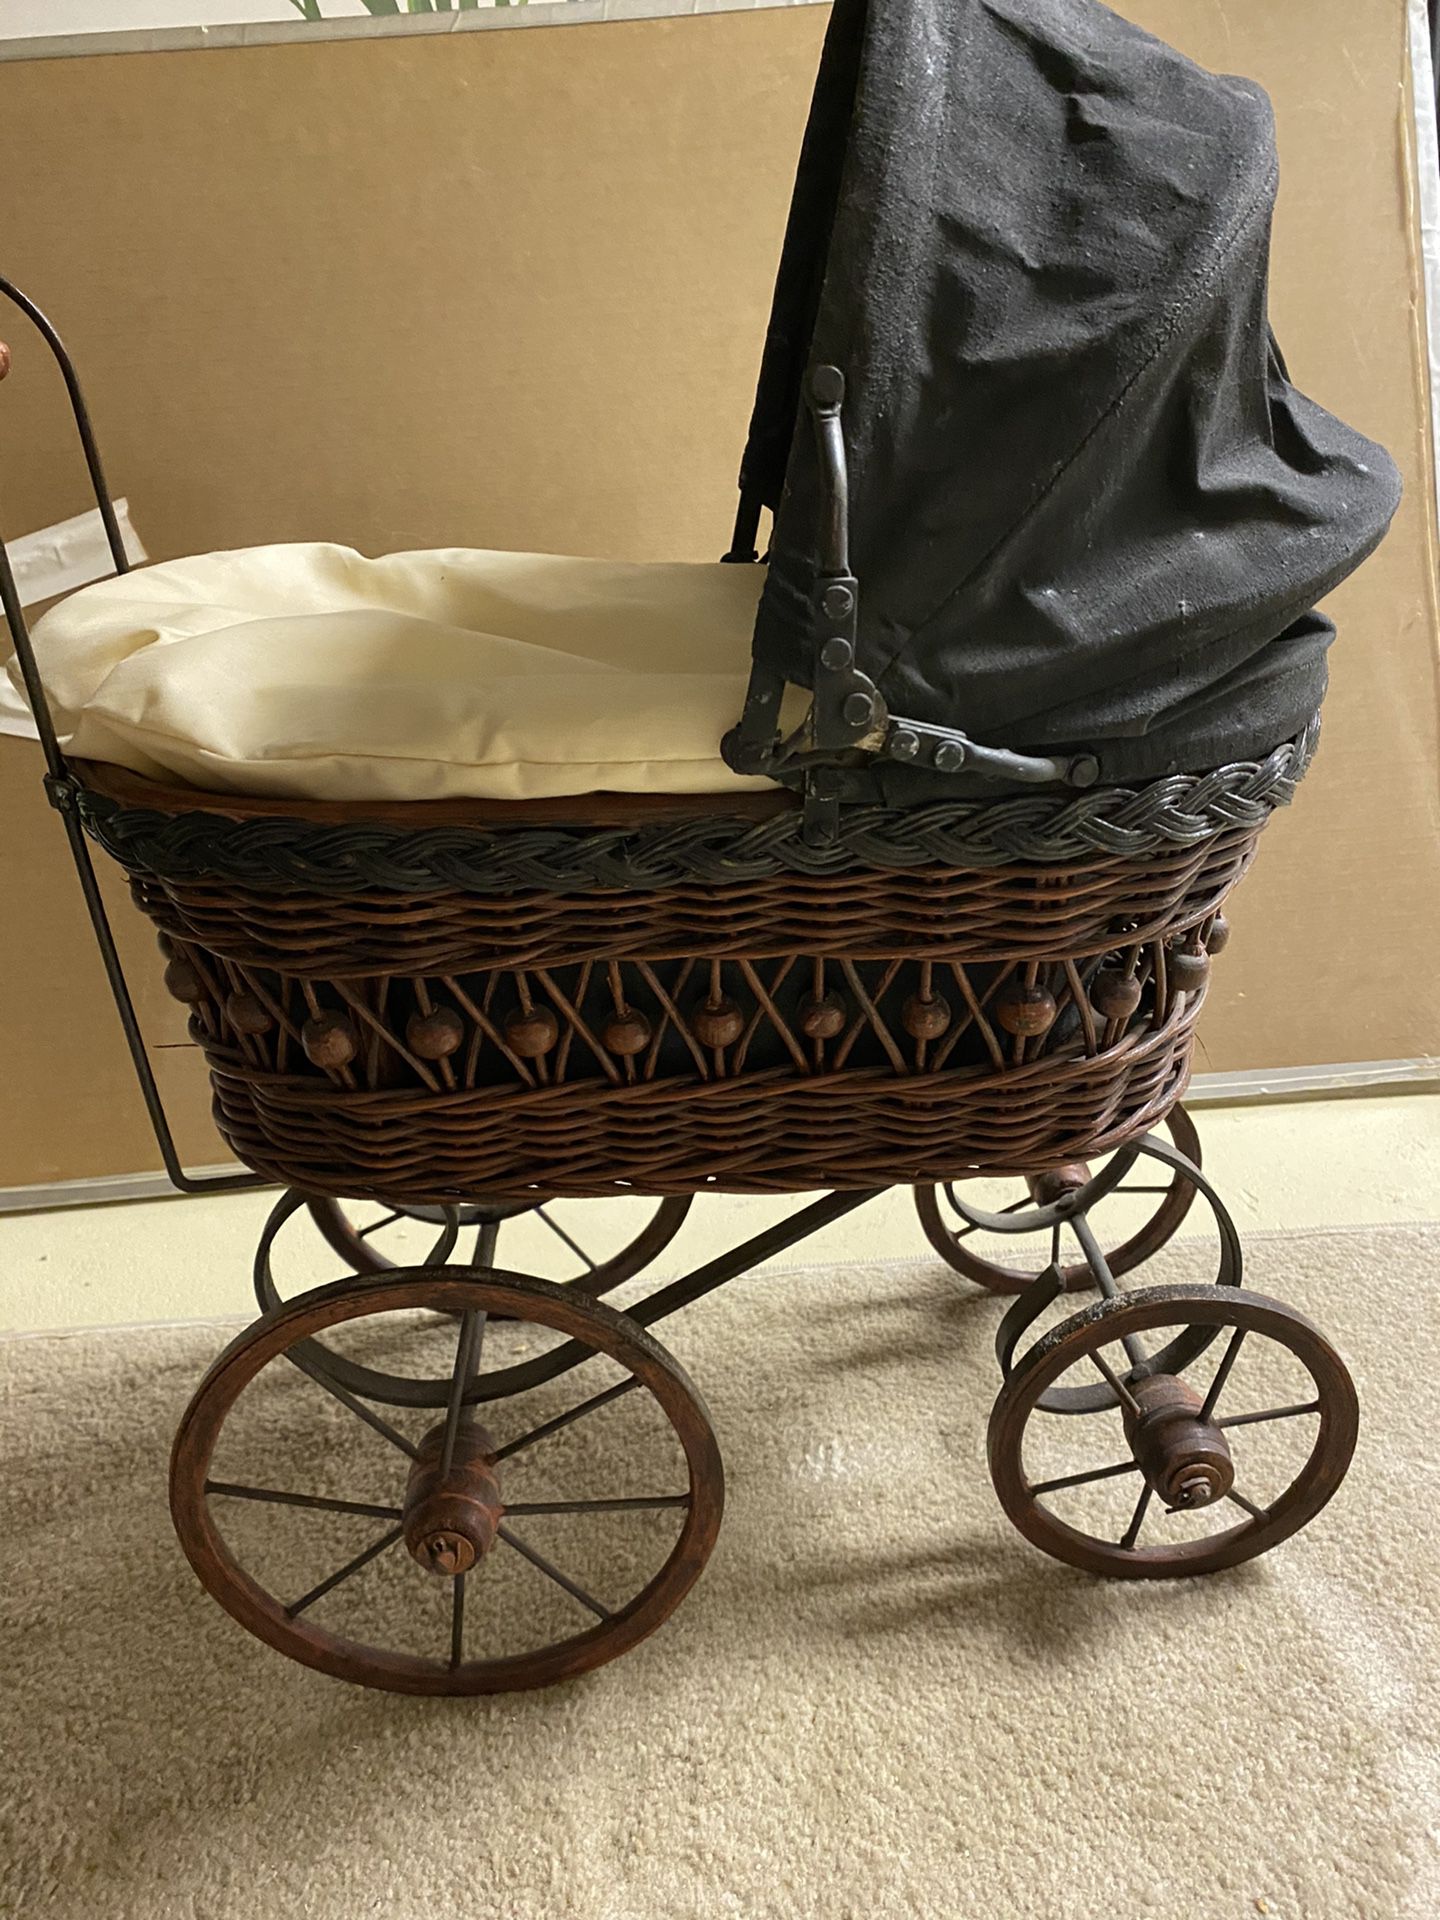 Vintage reproduction baby buggy pram For toy dolls